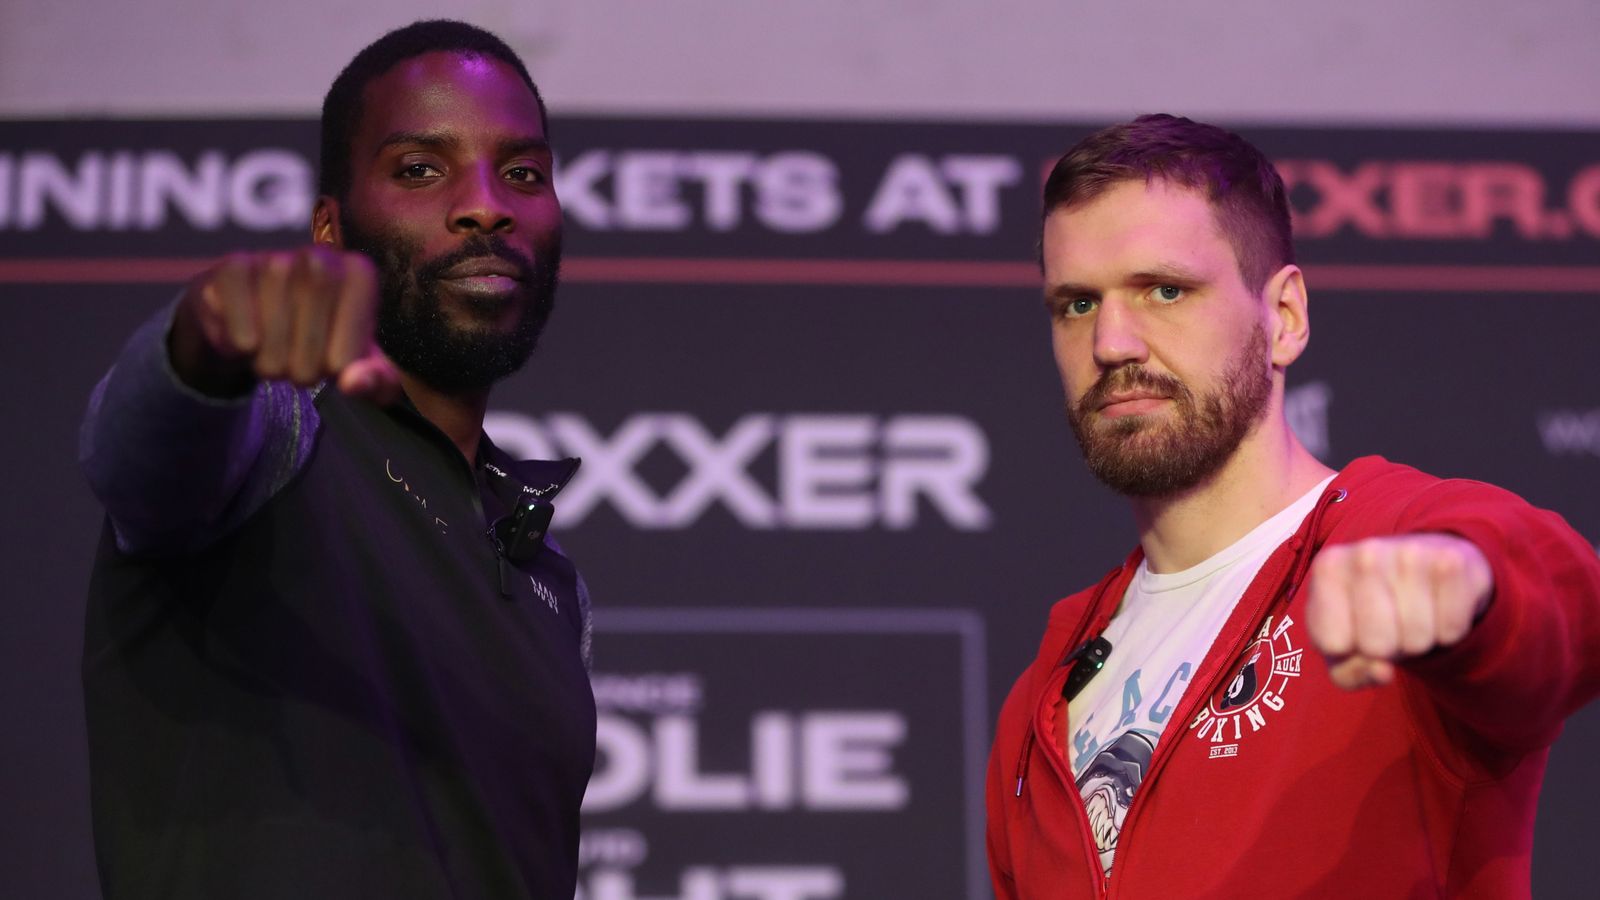 Lawrence Okolie and David Mild face off forward of world title combat: ‘One in every of us will develop into irrelevant’